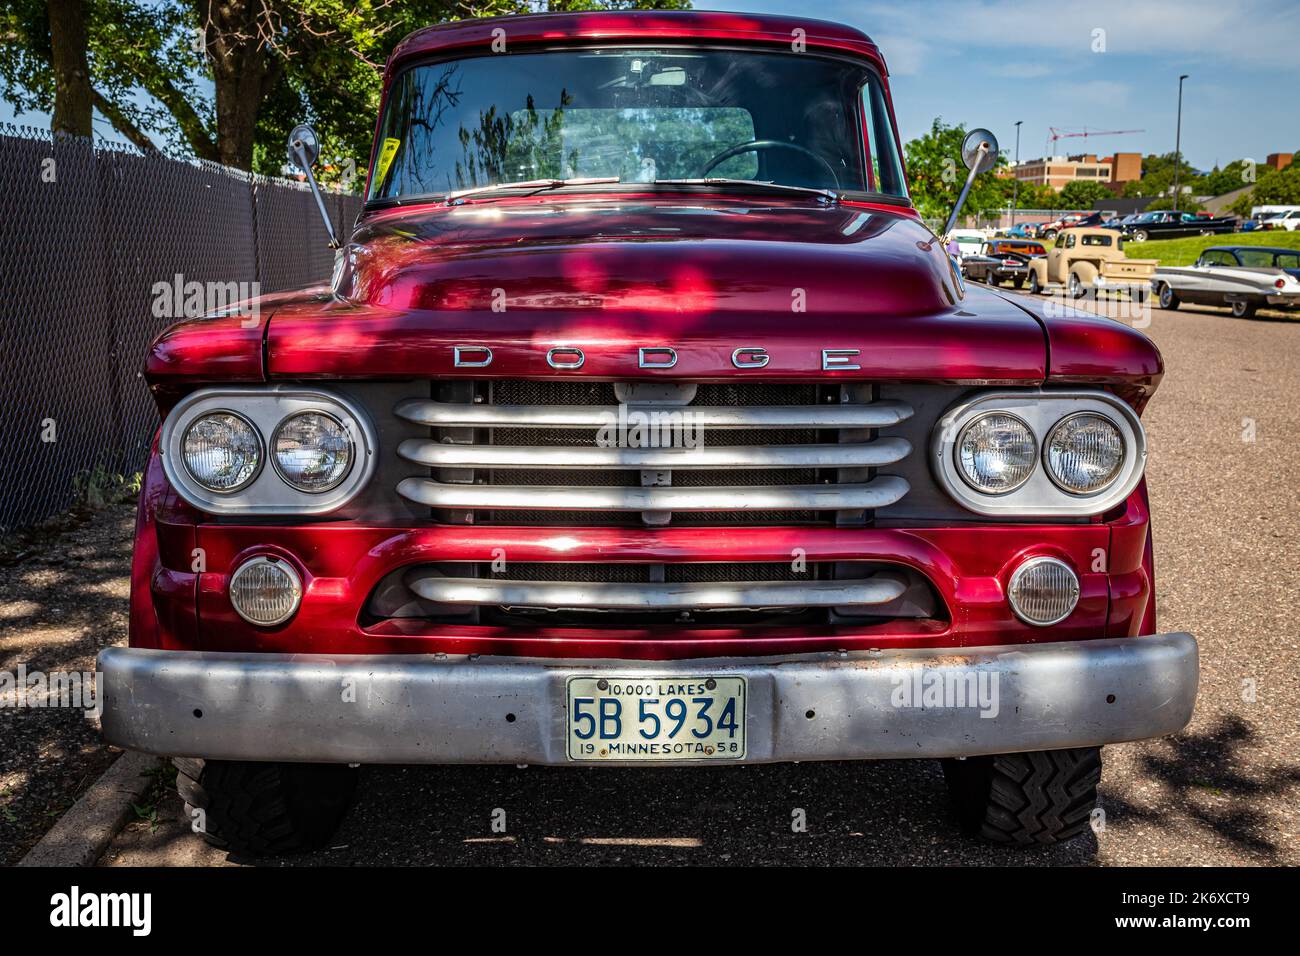 Falcon Heights, MN - June 19, 2022: High perspective front view of a 1958 Dodge W-100 Power Wagon Pickup Truck at a local car show. Stock Photo